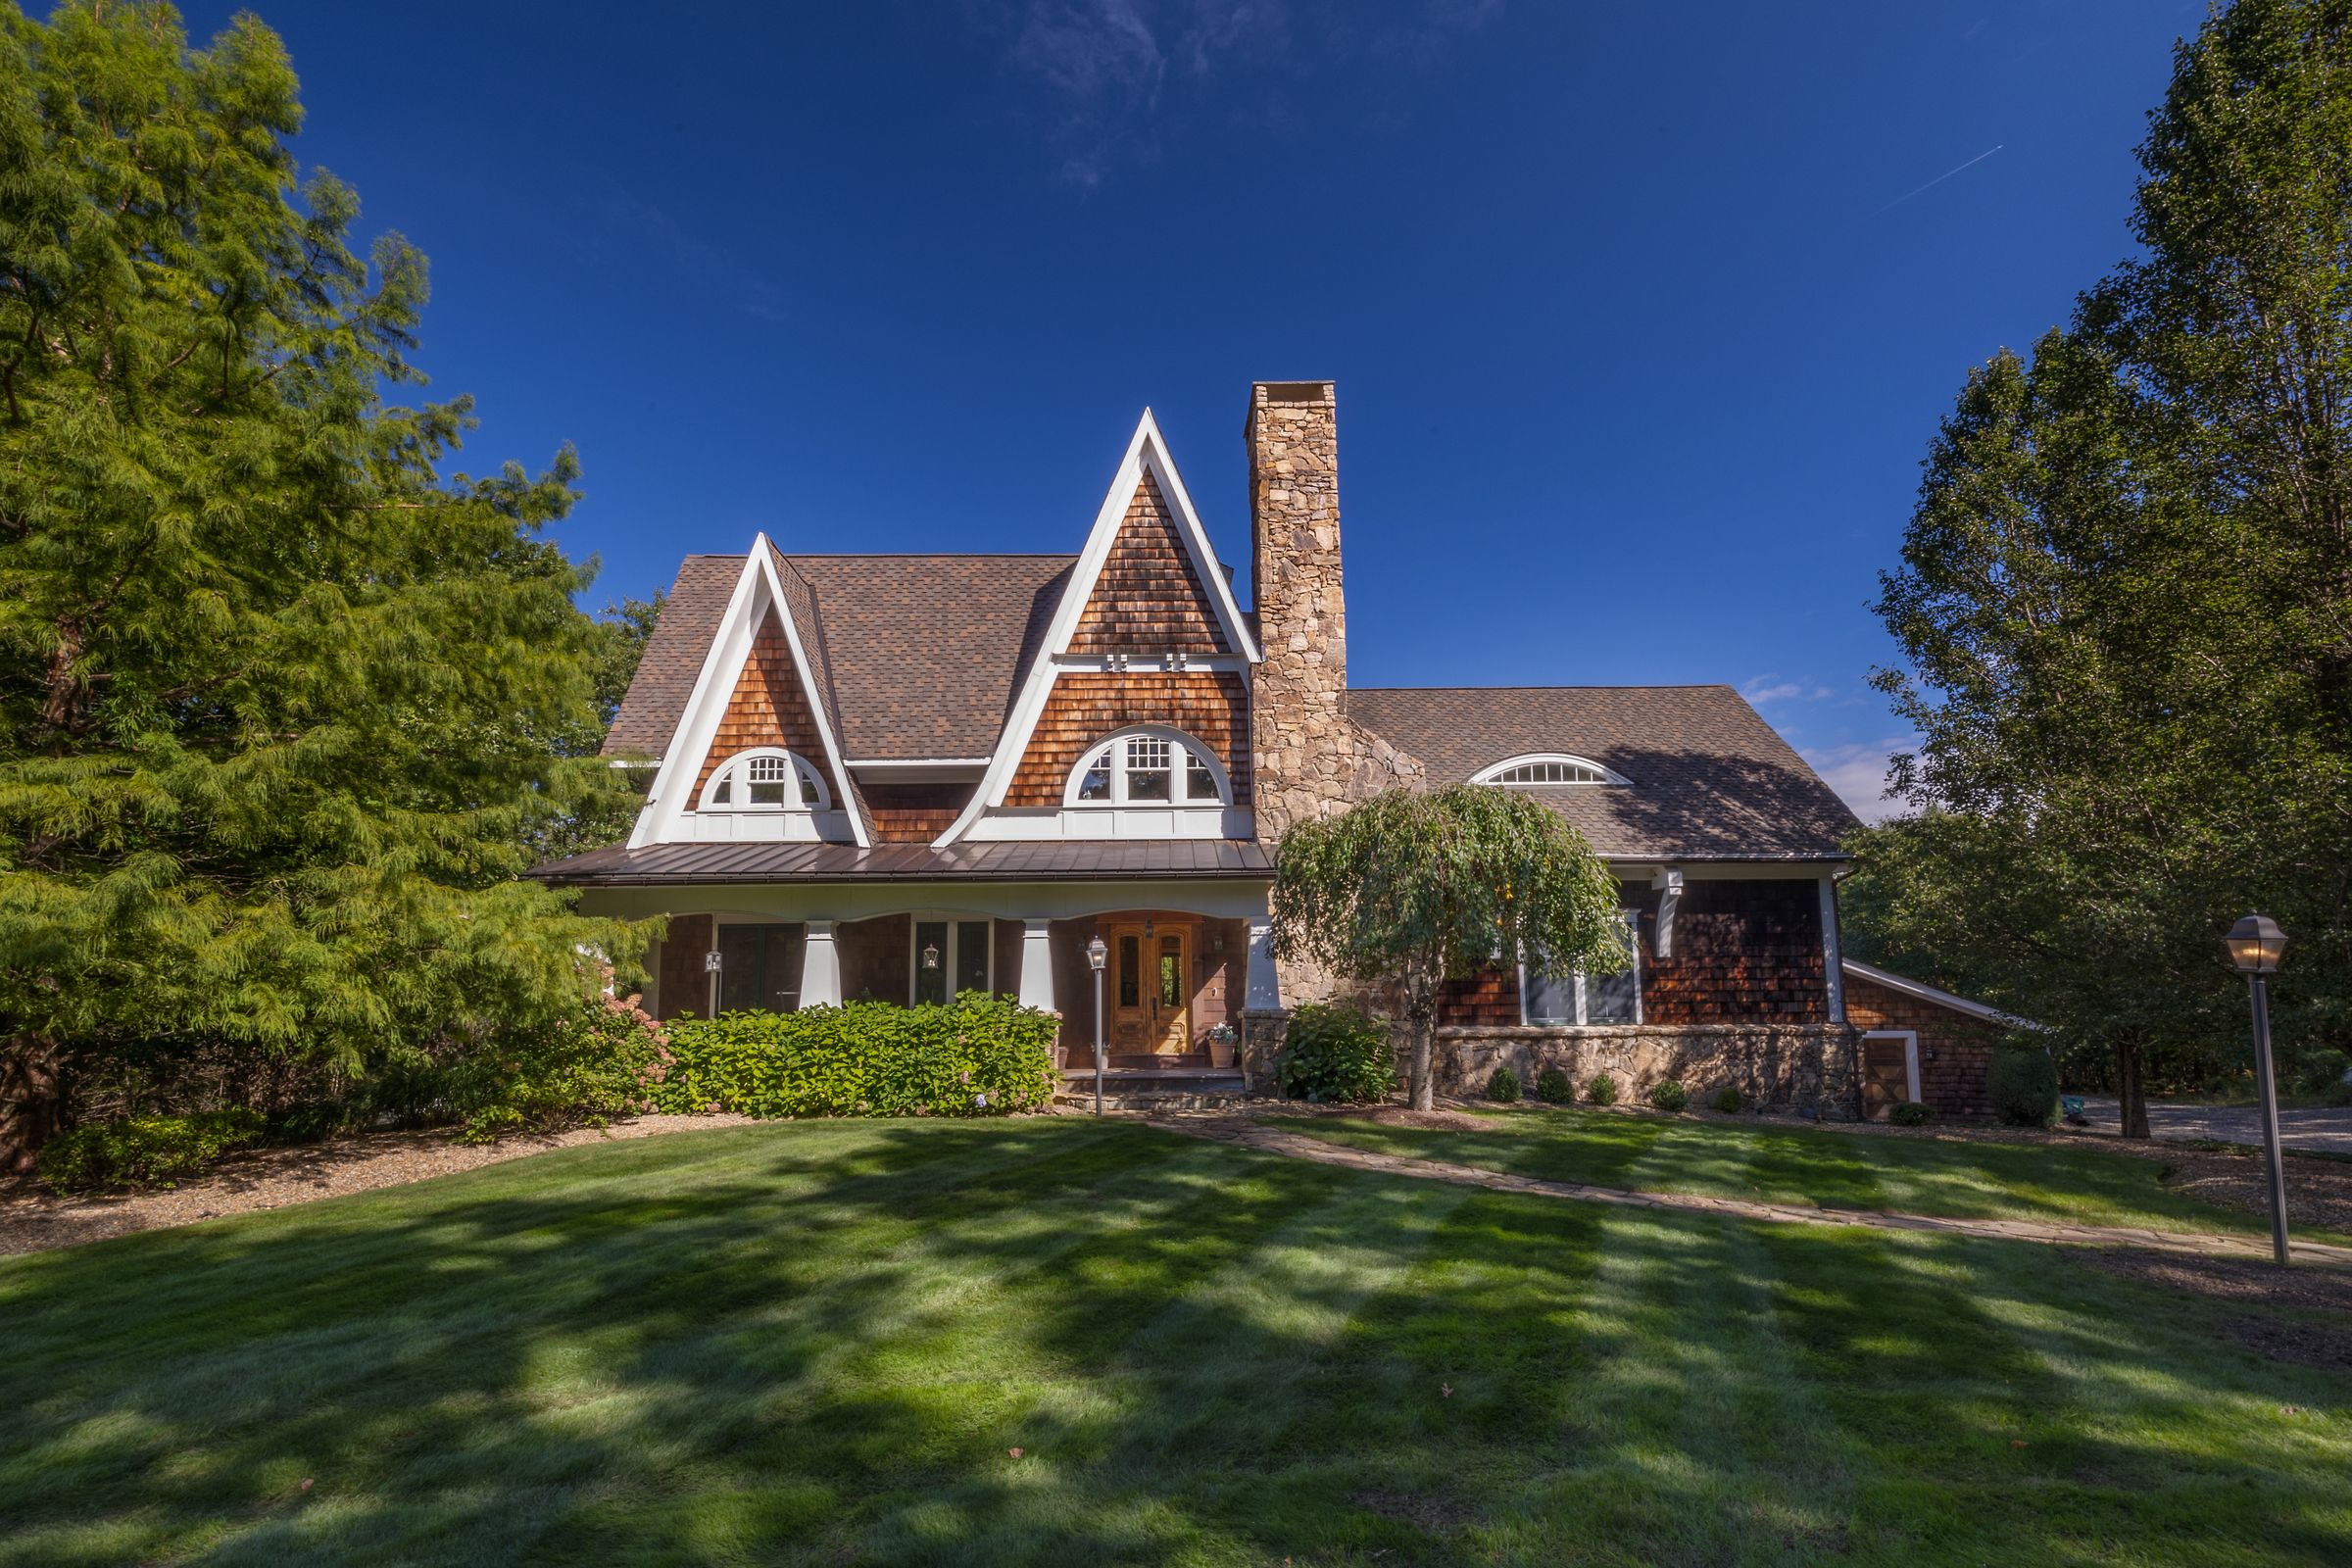 LILA DELMAN COMPASS SELLS BURRILVILLE HOME FOR $1.225M,  SETTING RECORD FOR THE HIGHEST HOME SALE IN THE MUNICIPALITY*